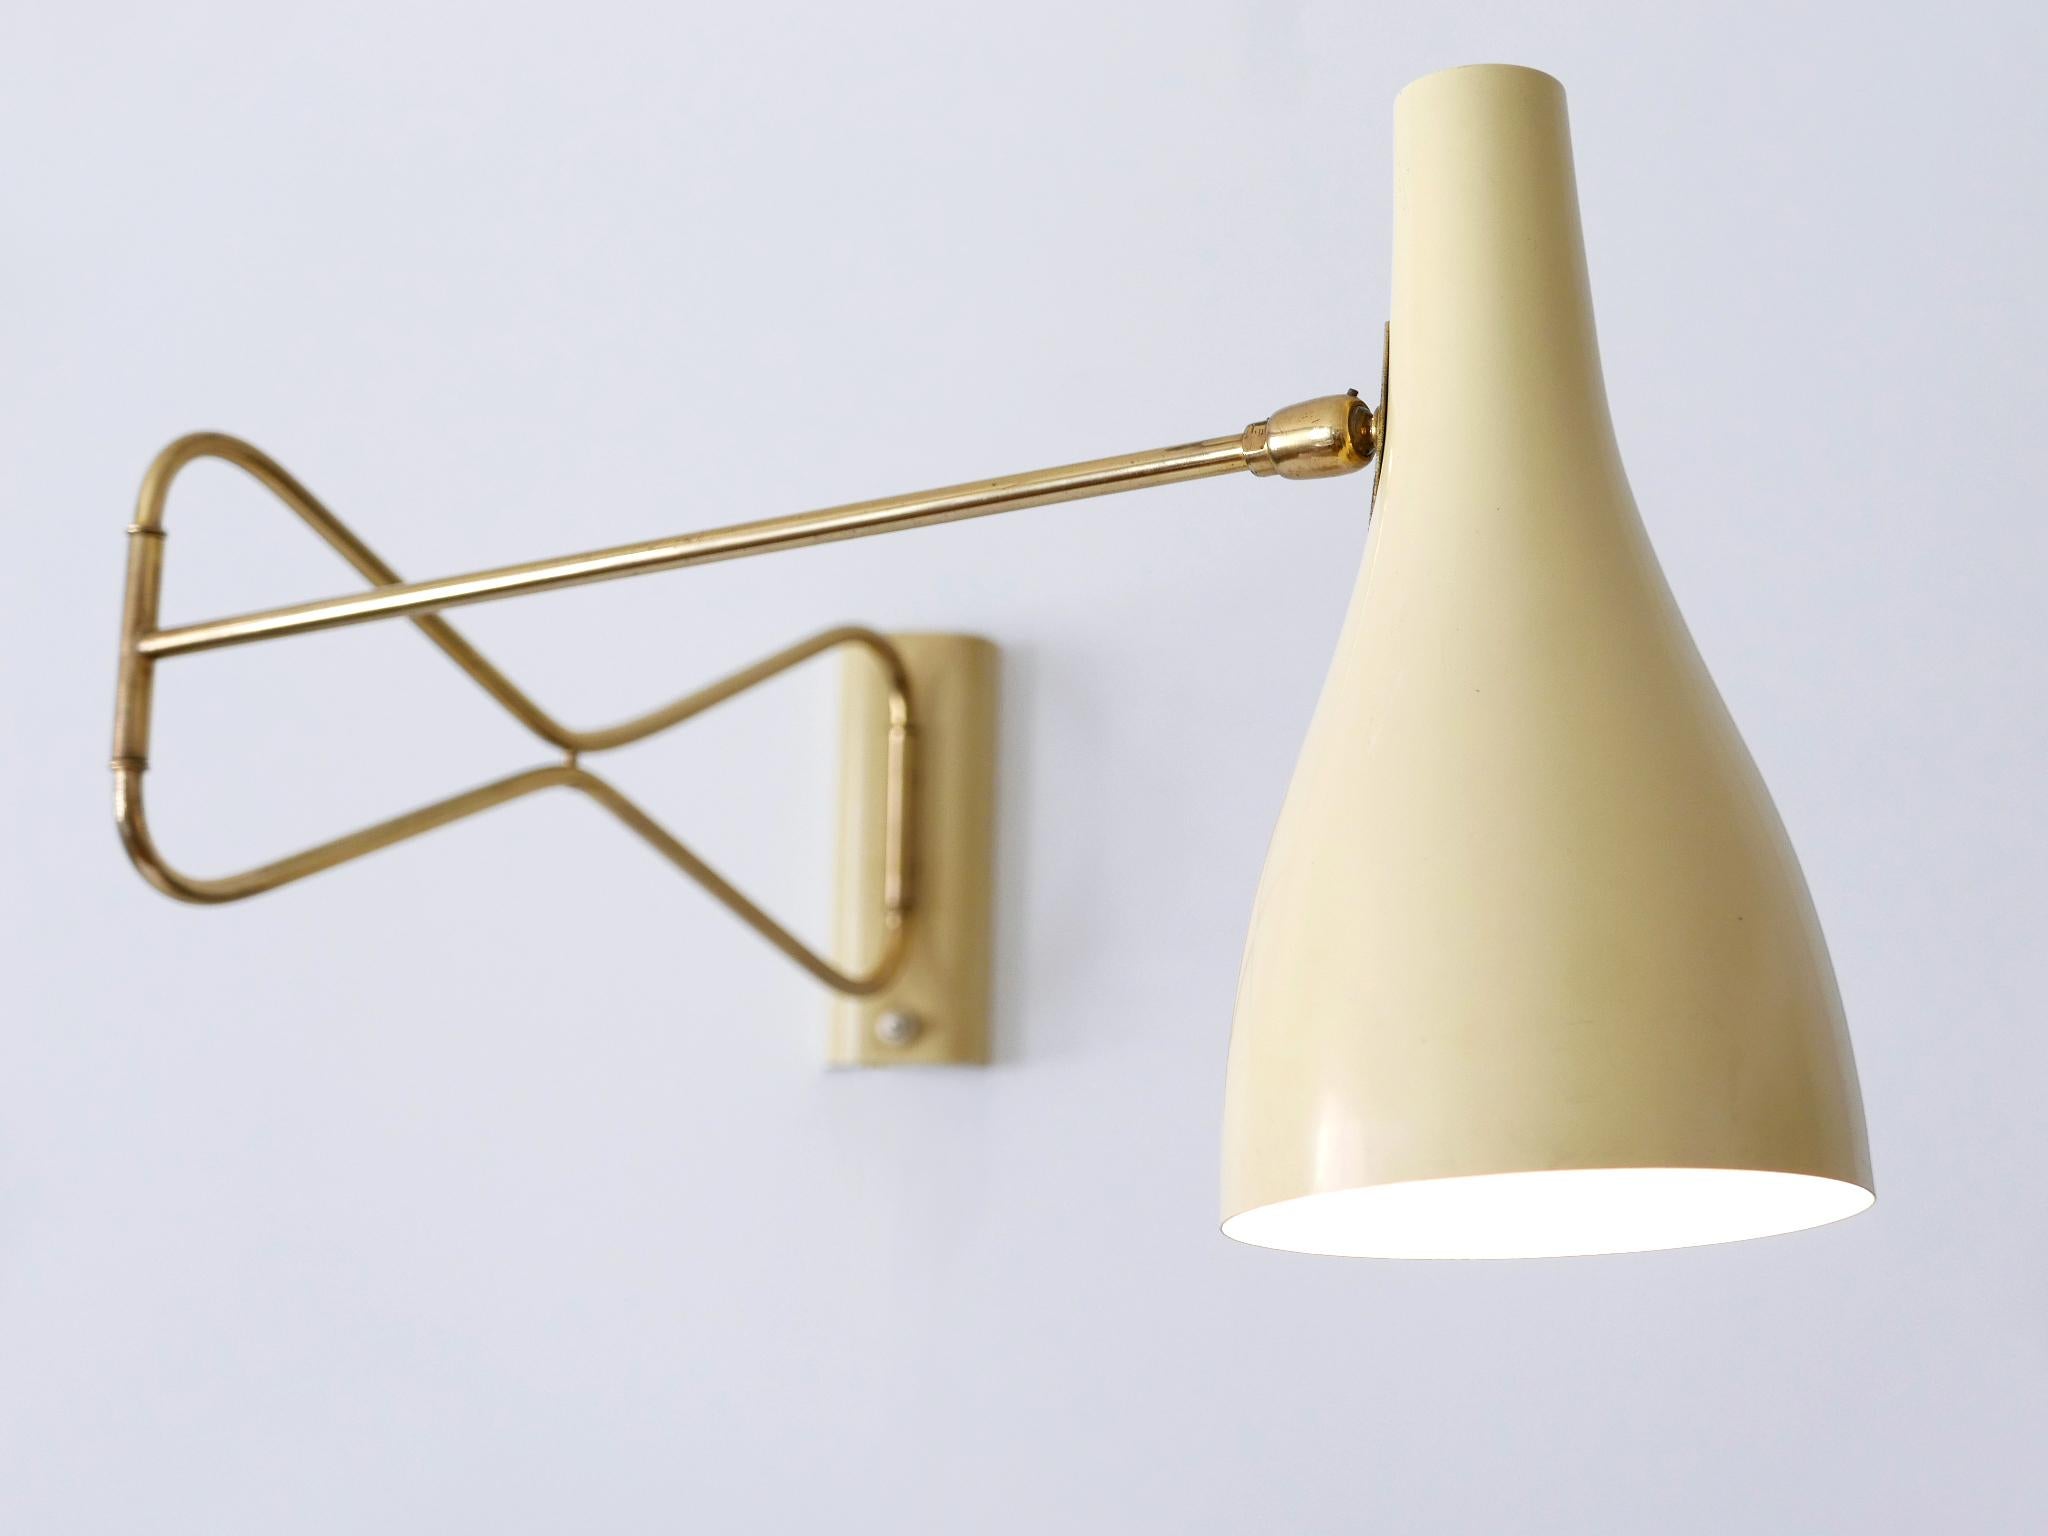 Rare & Elegant Mid Century Modern Wall Lamp '9590/28' by Cosack Germany 1950s For Sale 2